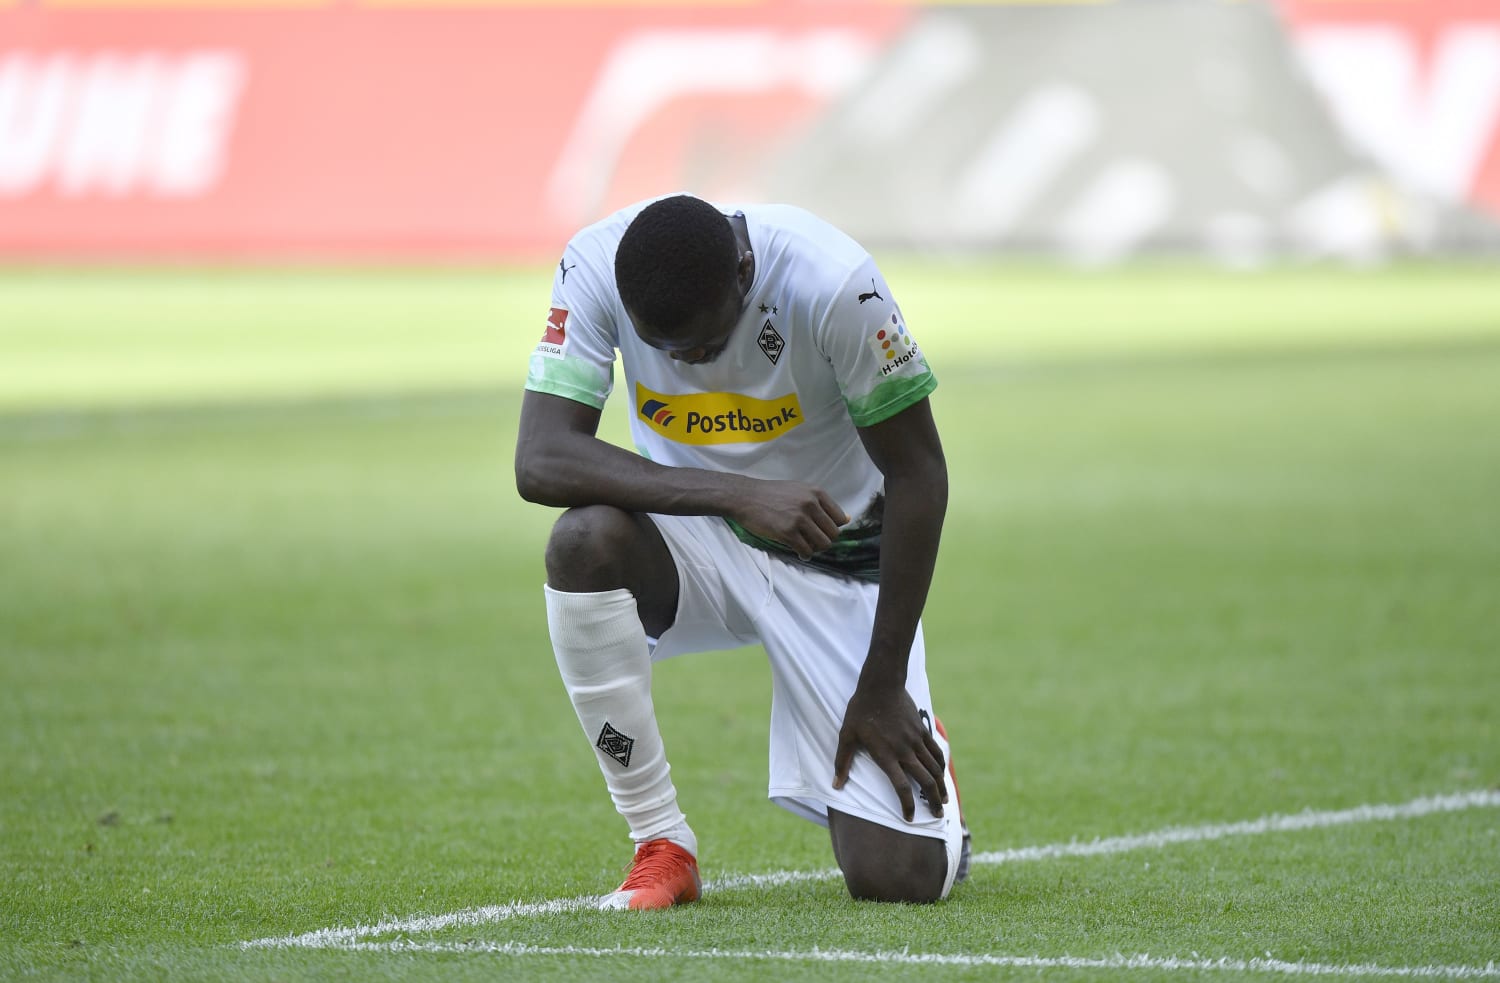 Marcus Thuram celebrates goal by taking a knee in Bundesliga as protests continue